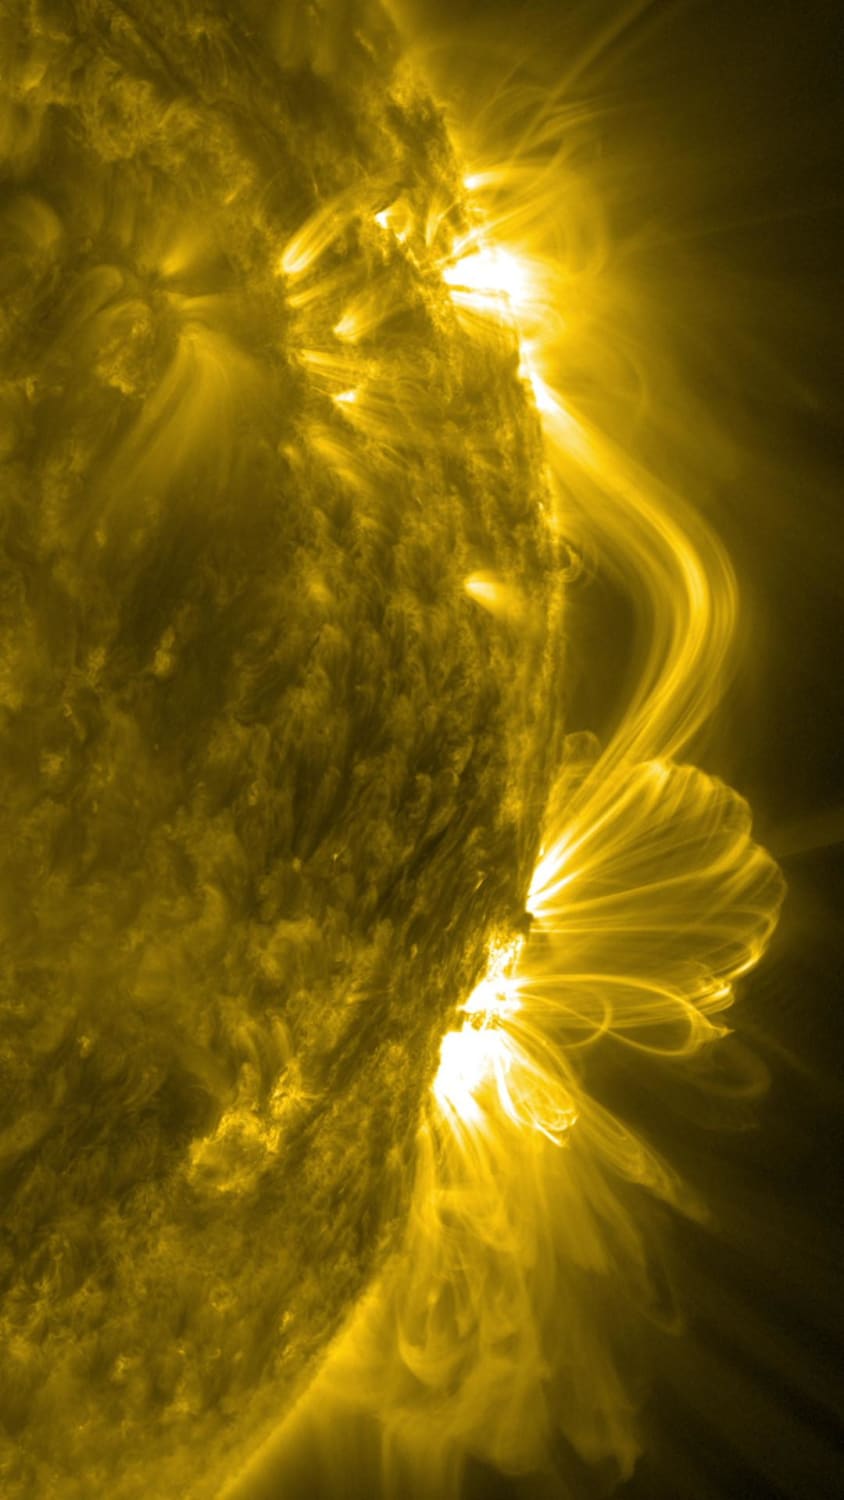 Coronal loops on the Sun are captured in ultraviolet light using the 171 ångström channel of the Atmospheric Imaging Assembly